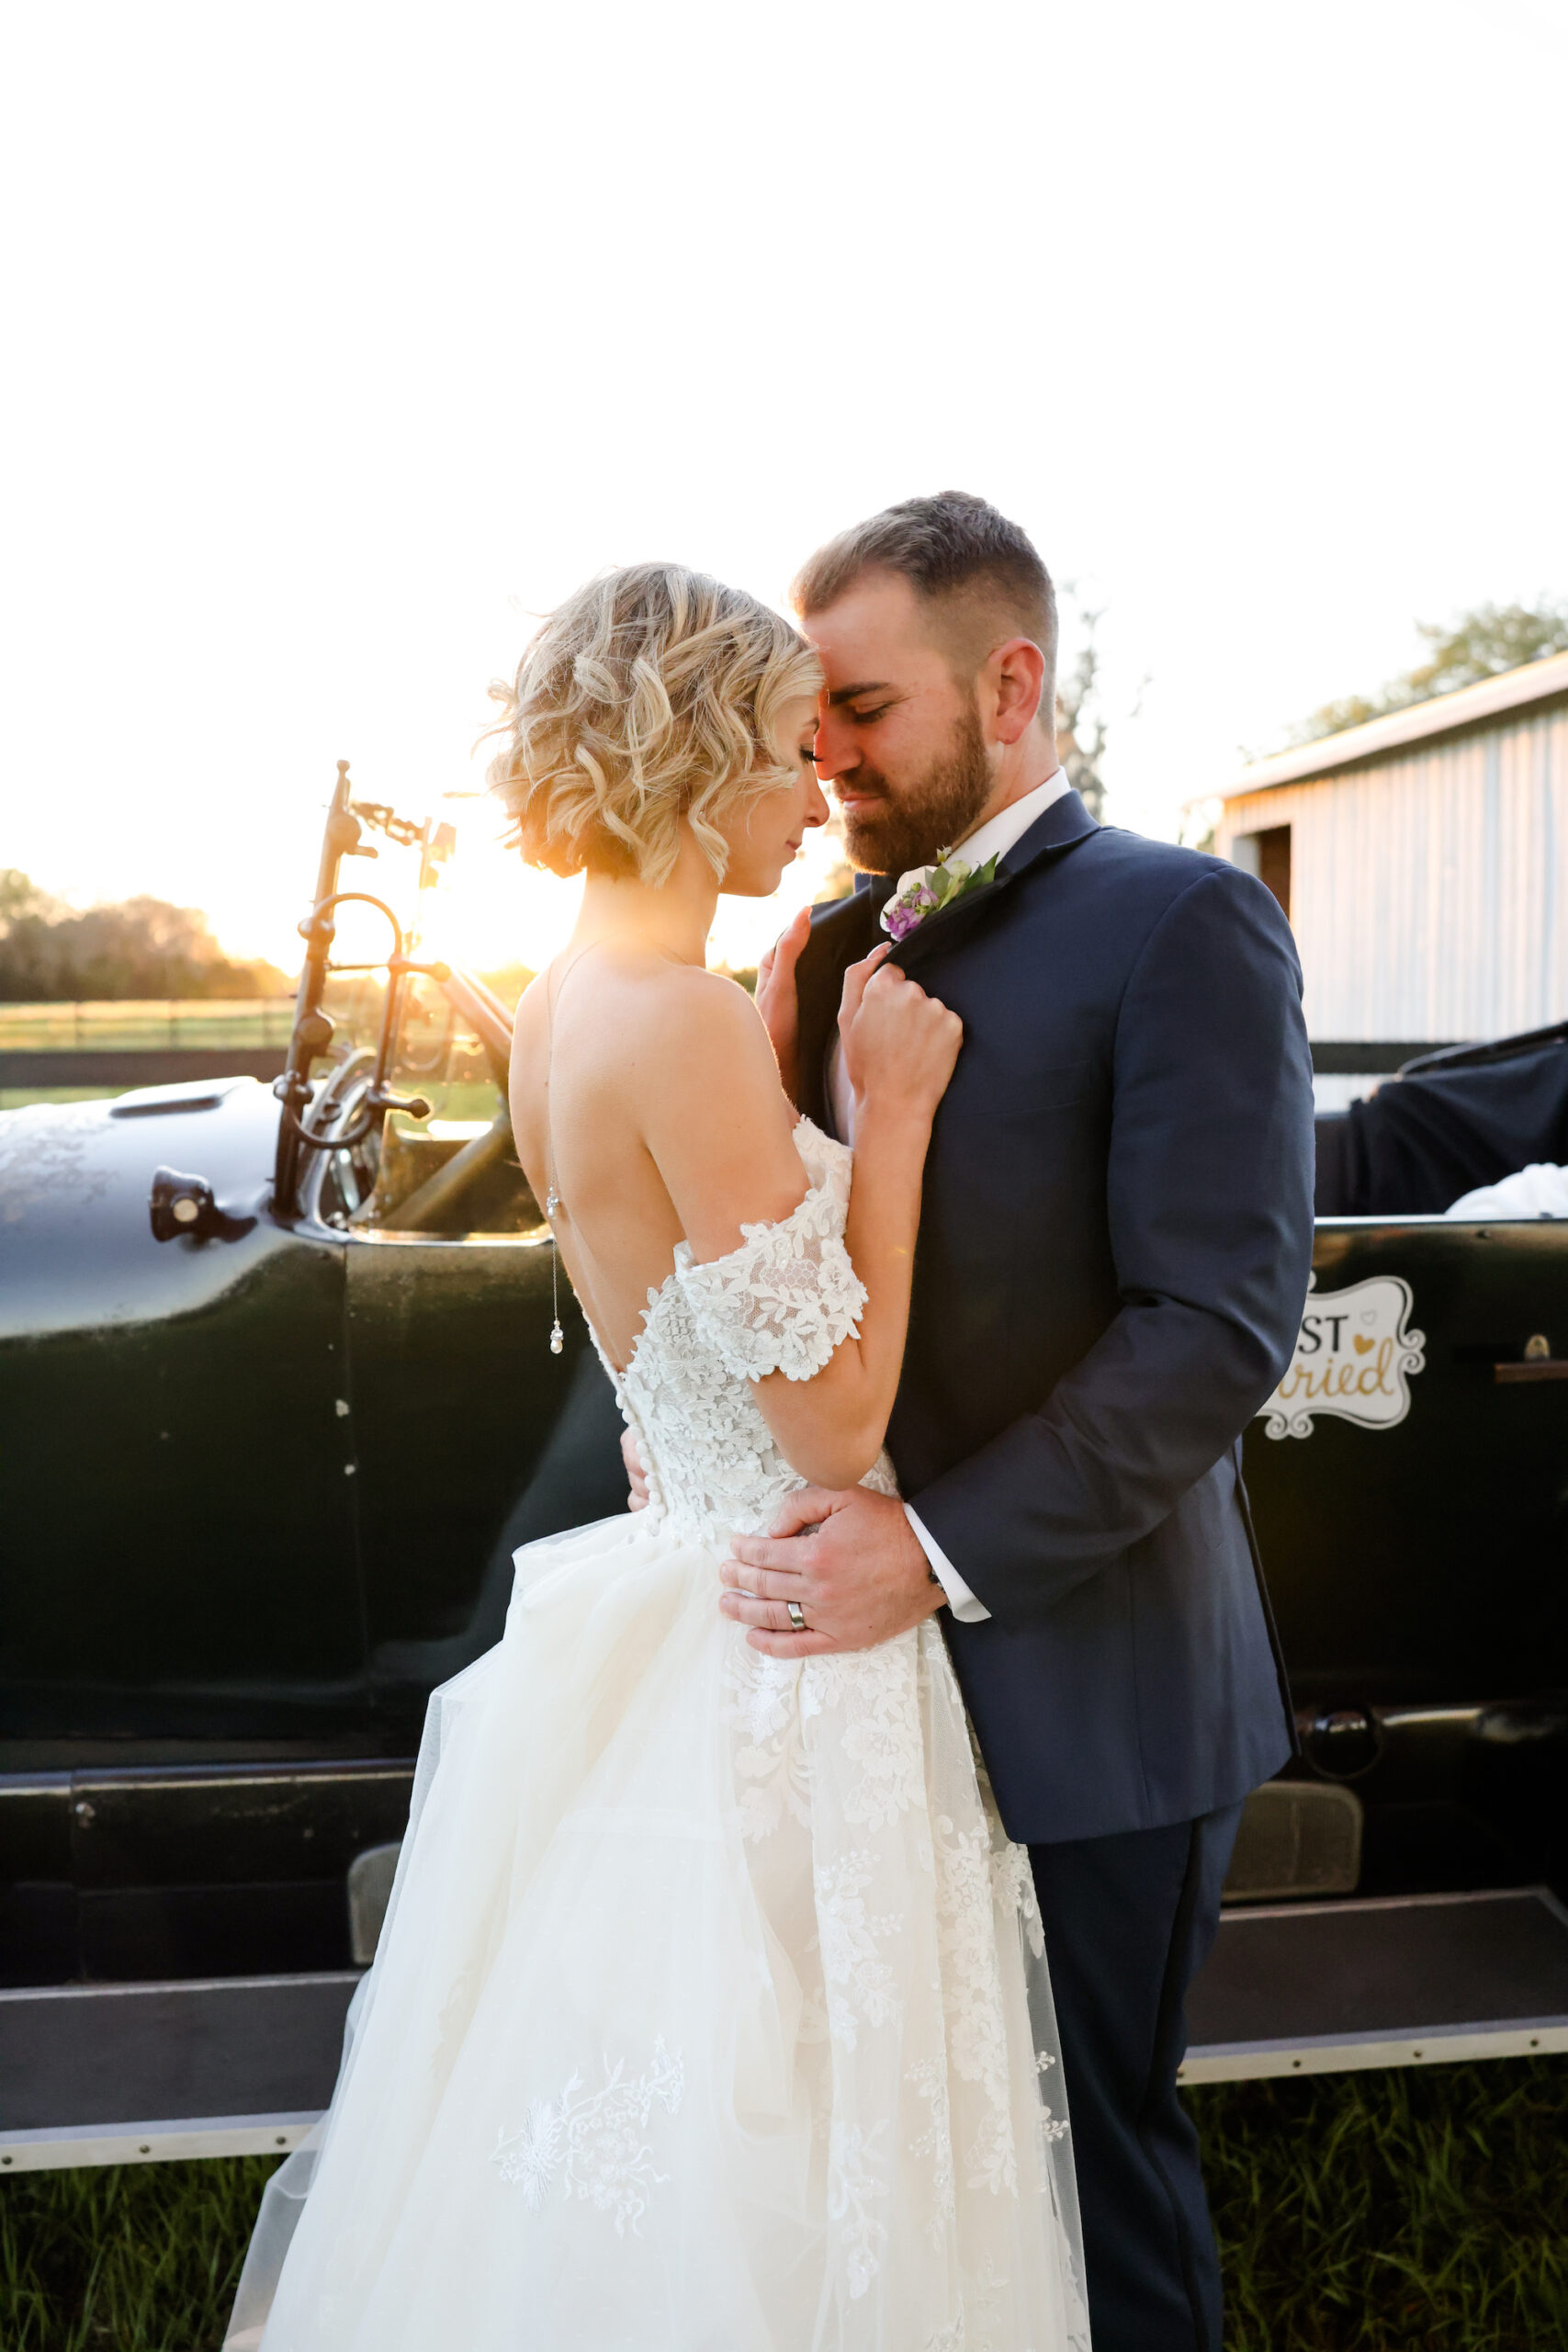 Bride and Groom Classic Getaway Car Wedding Portrait | Tampa Bay Wedding Venue Legacy Lane Weddings | Dress Truly Forever Bridal | Photographer Lifelong Photography | Hair and Makeup Adore Bridal